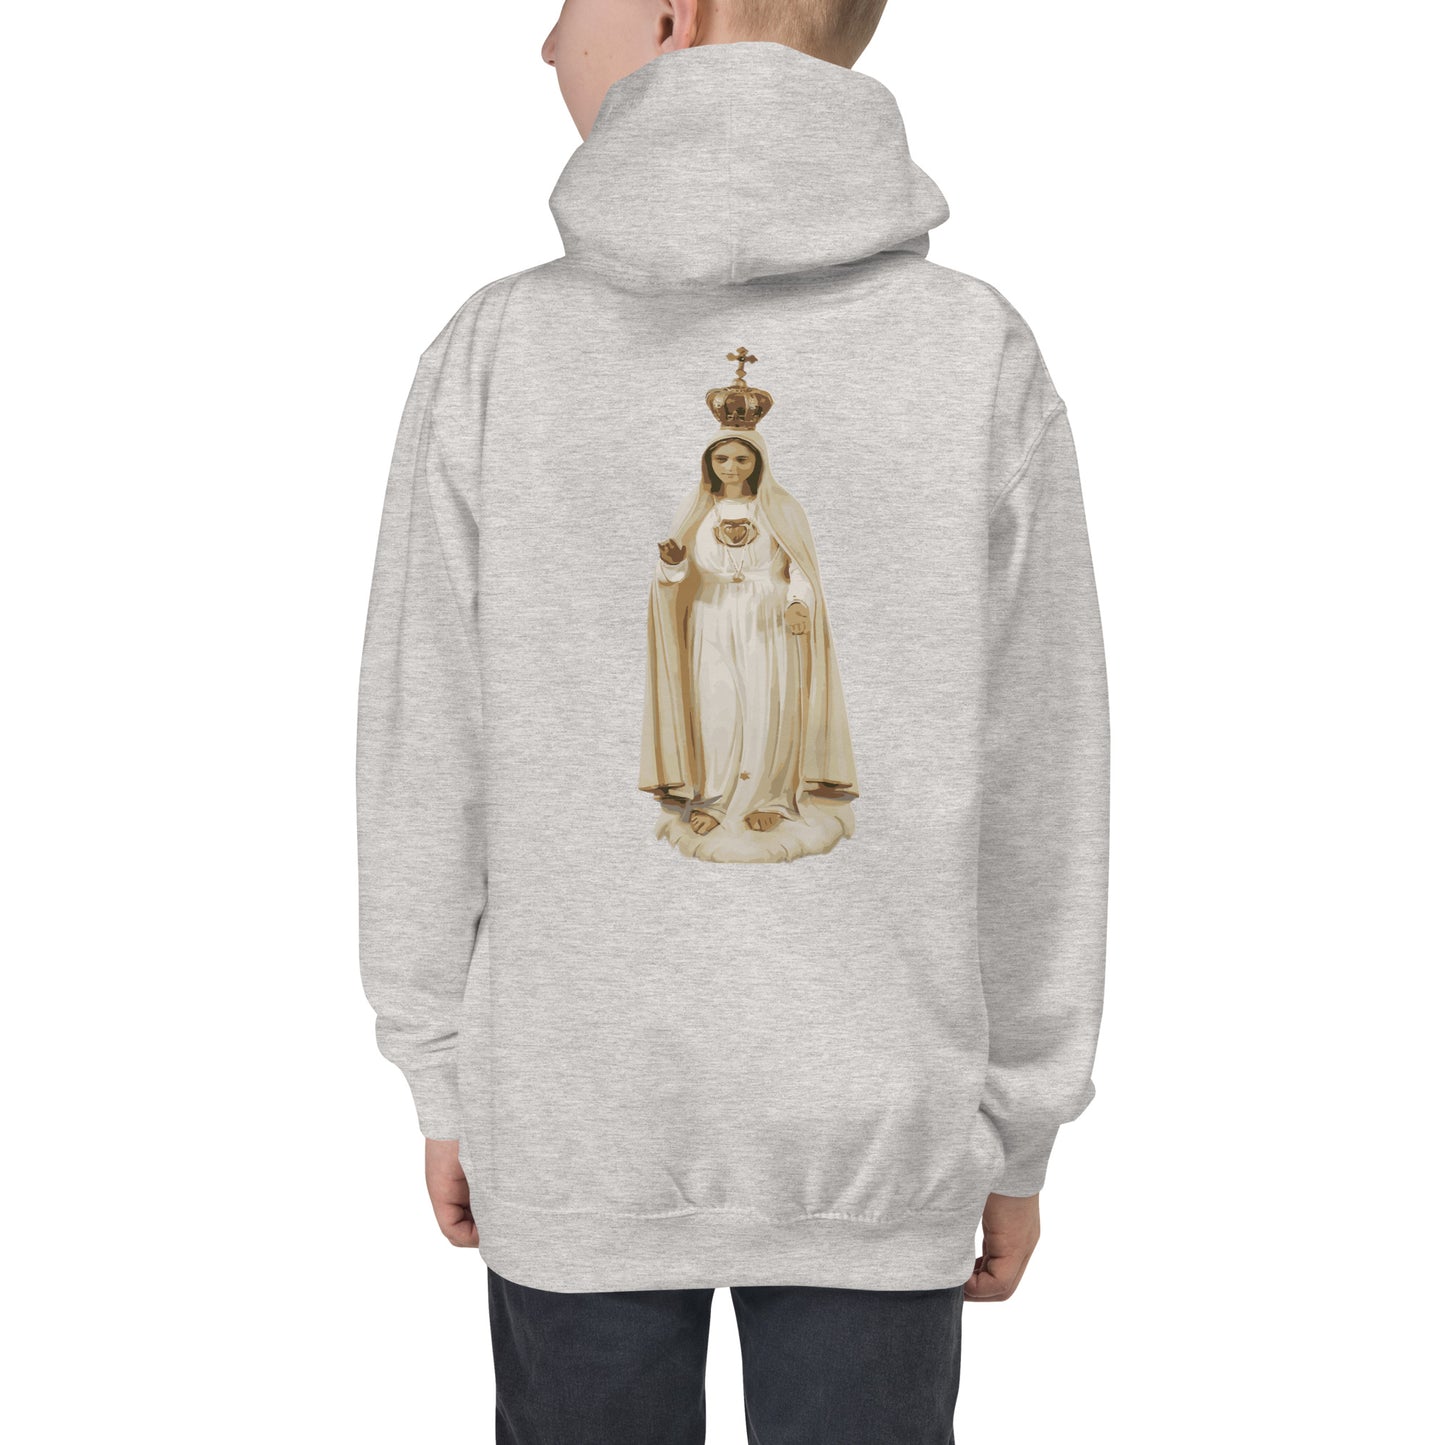 Our Lady of Fatima Children's Hoodie